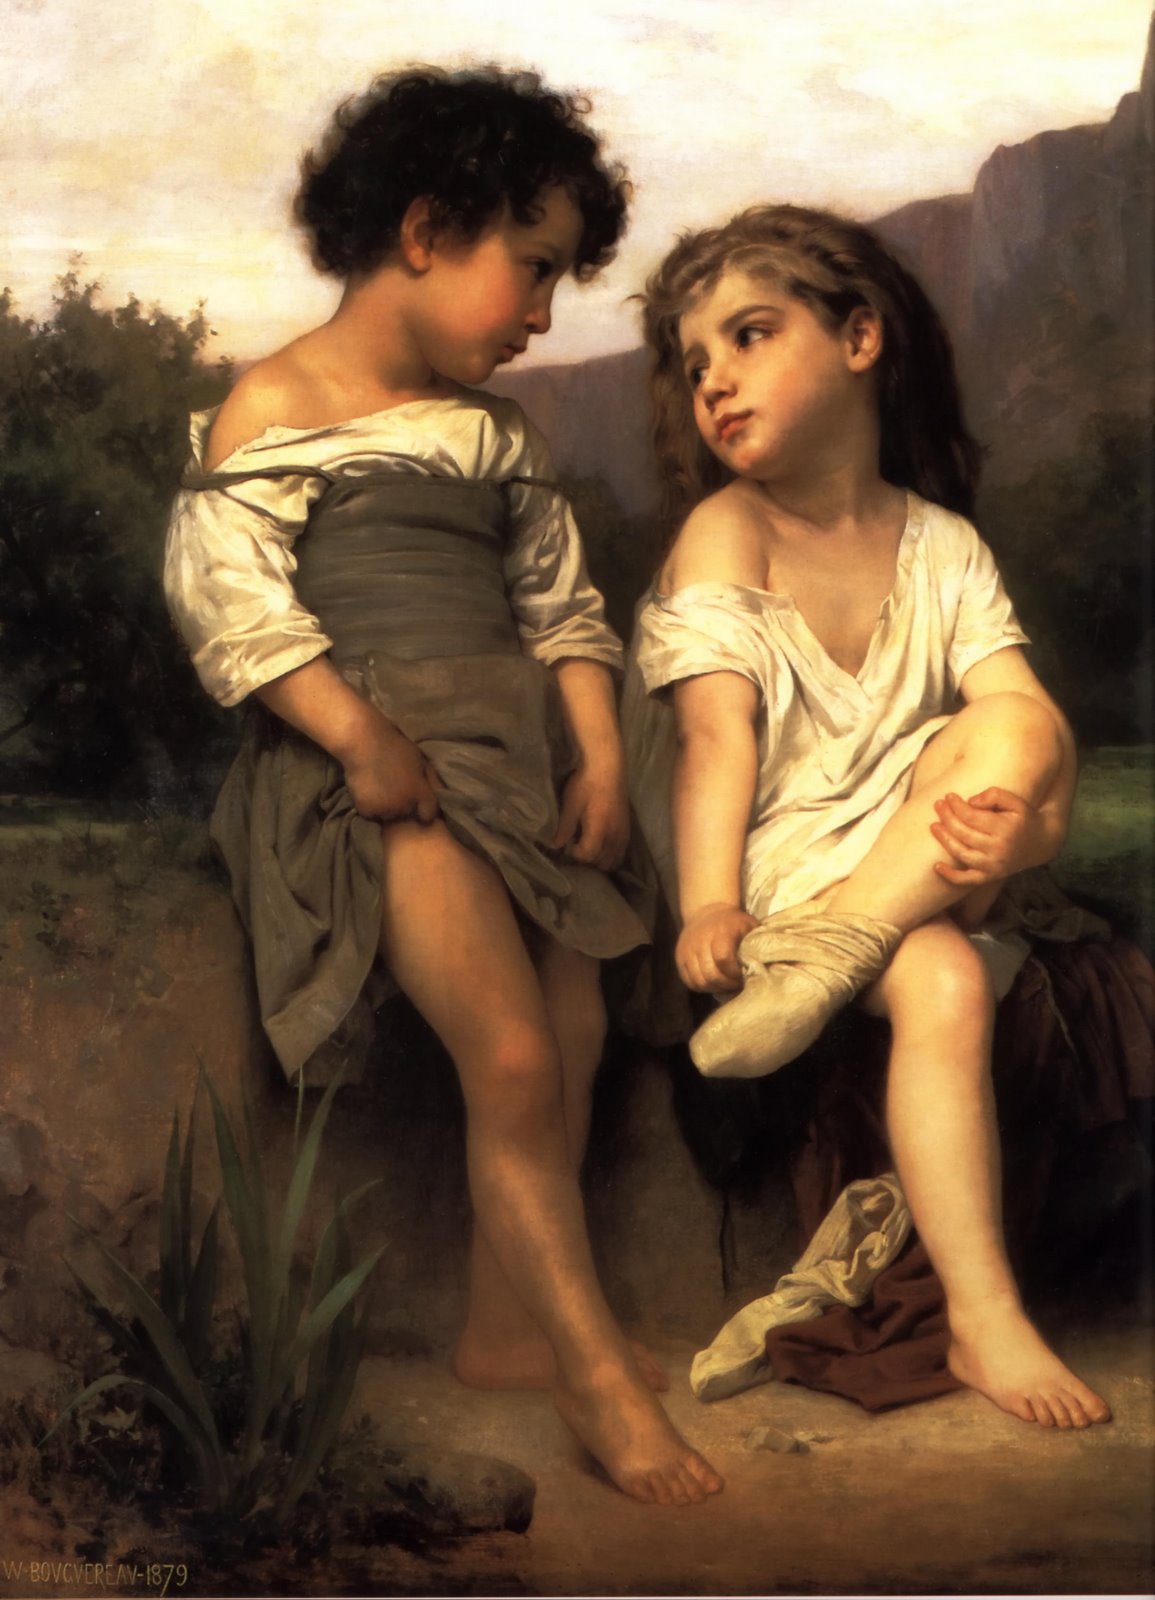 [William-Adolphe_Bouguereau_(1825-1905)_-_At_the_Edge_of_the_Brook_(1879).jpg]